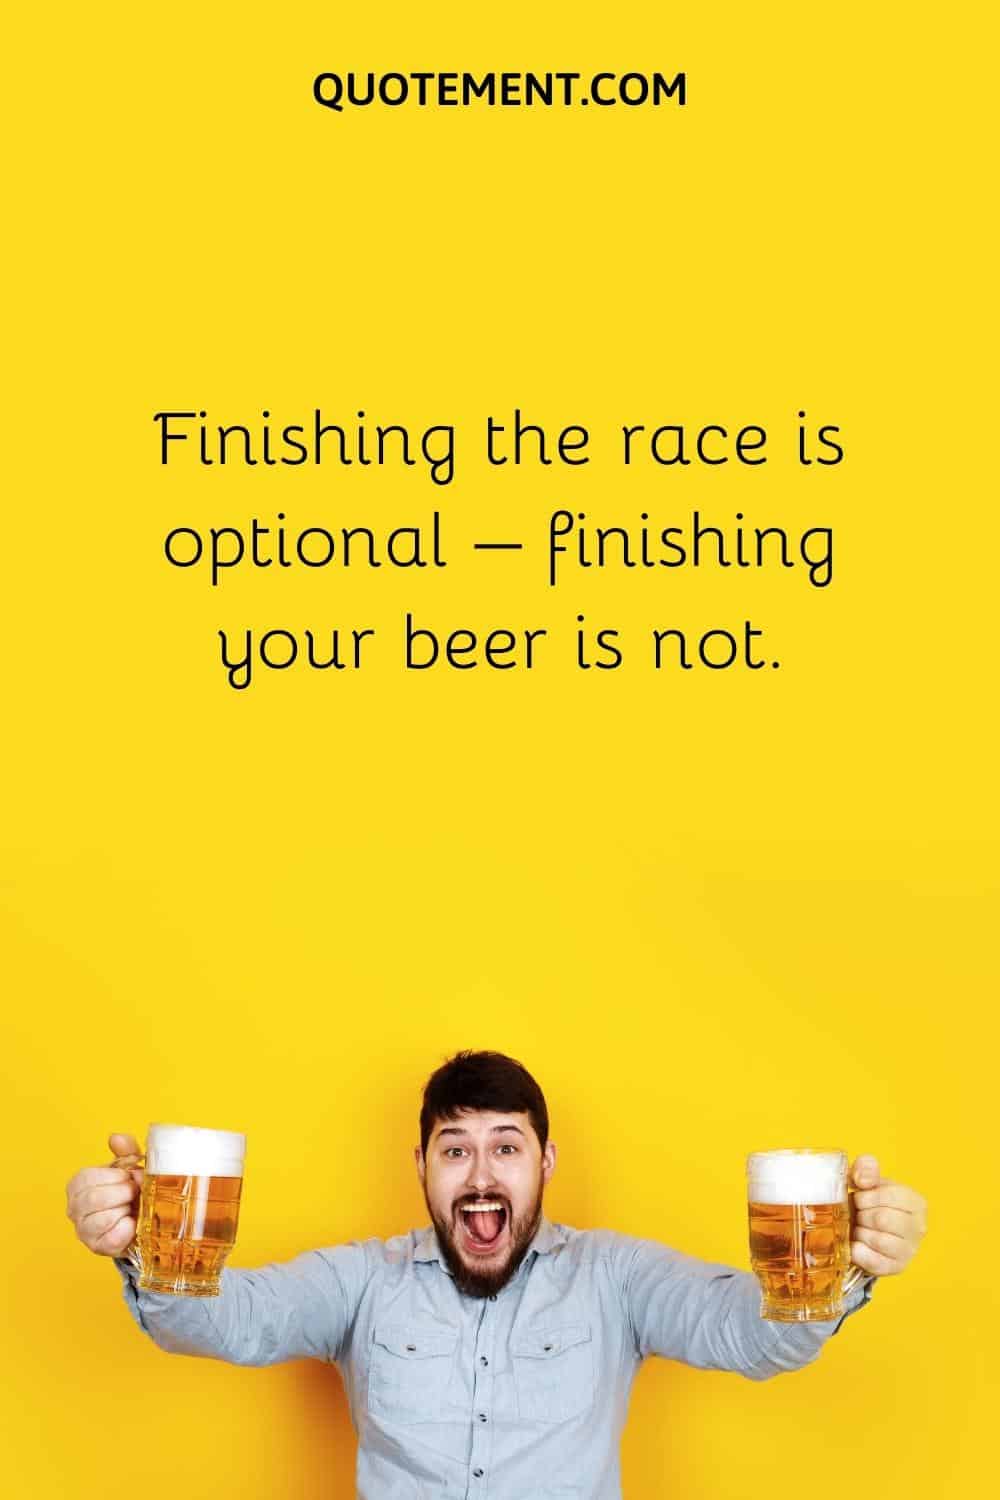 Finishing the race is optional – finishing your beer is not.